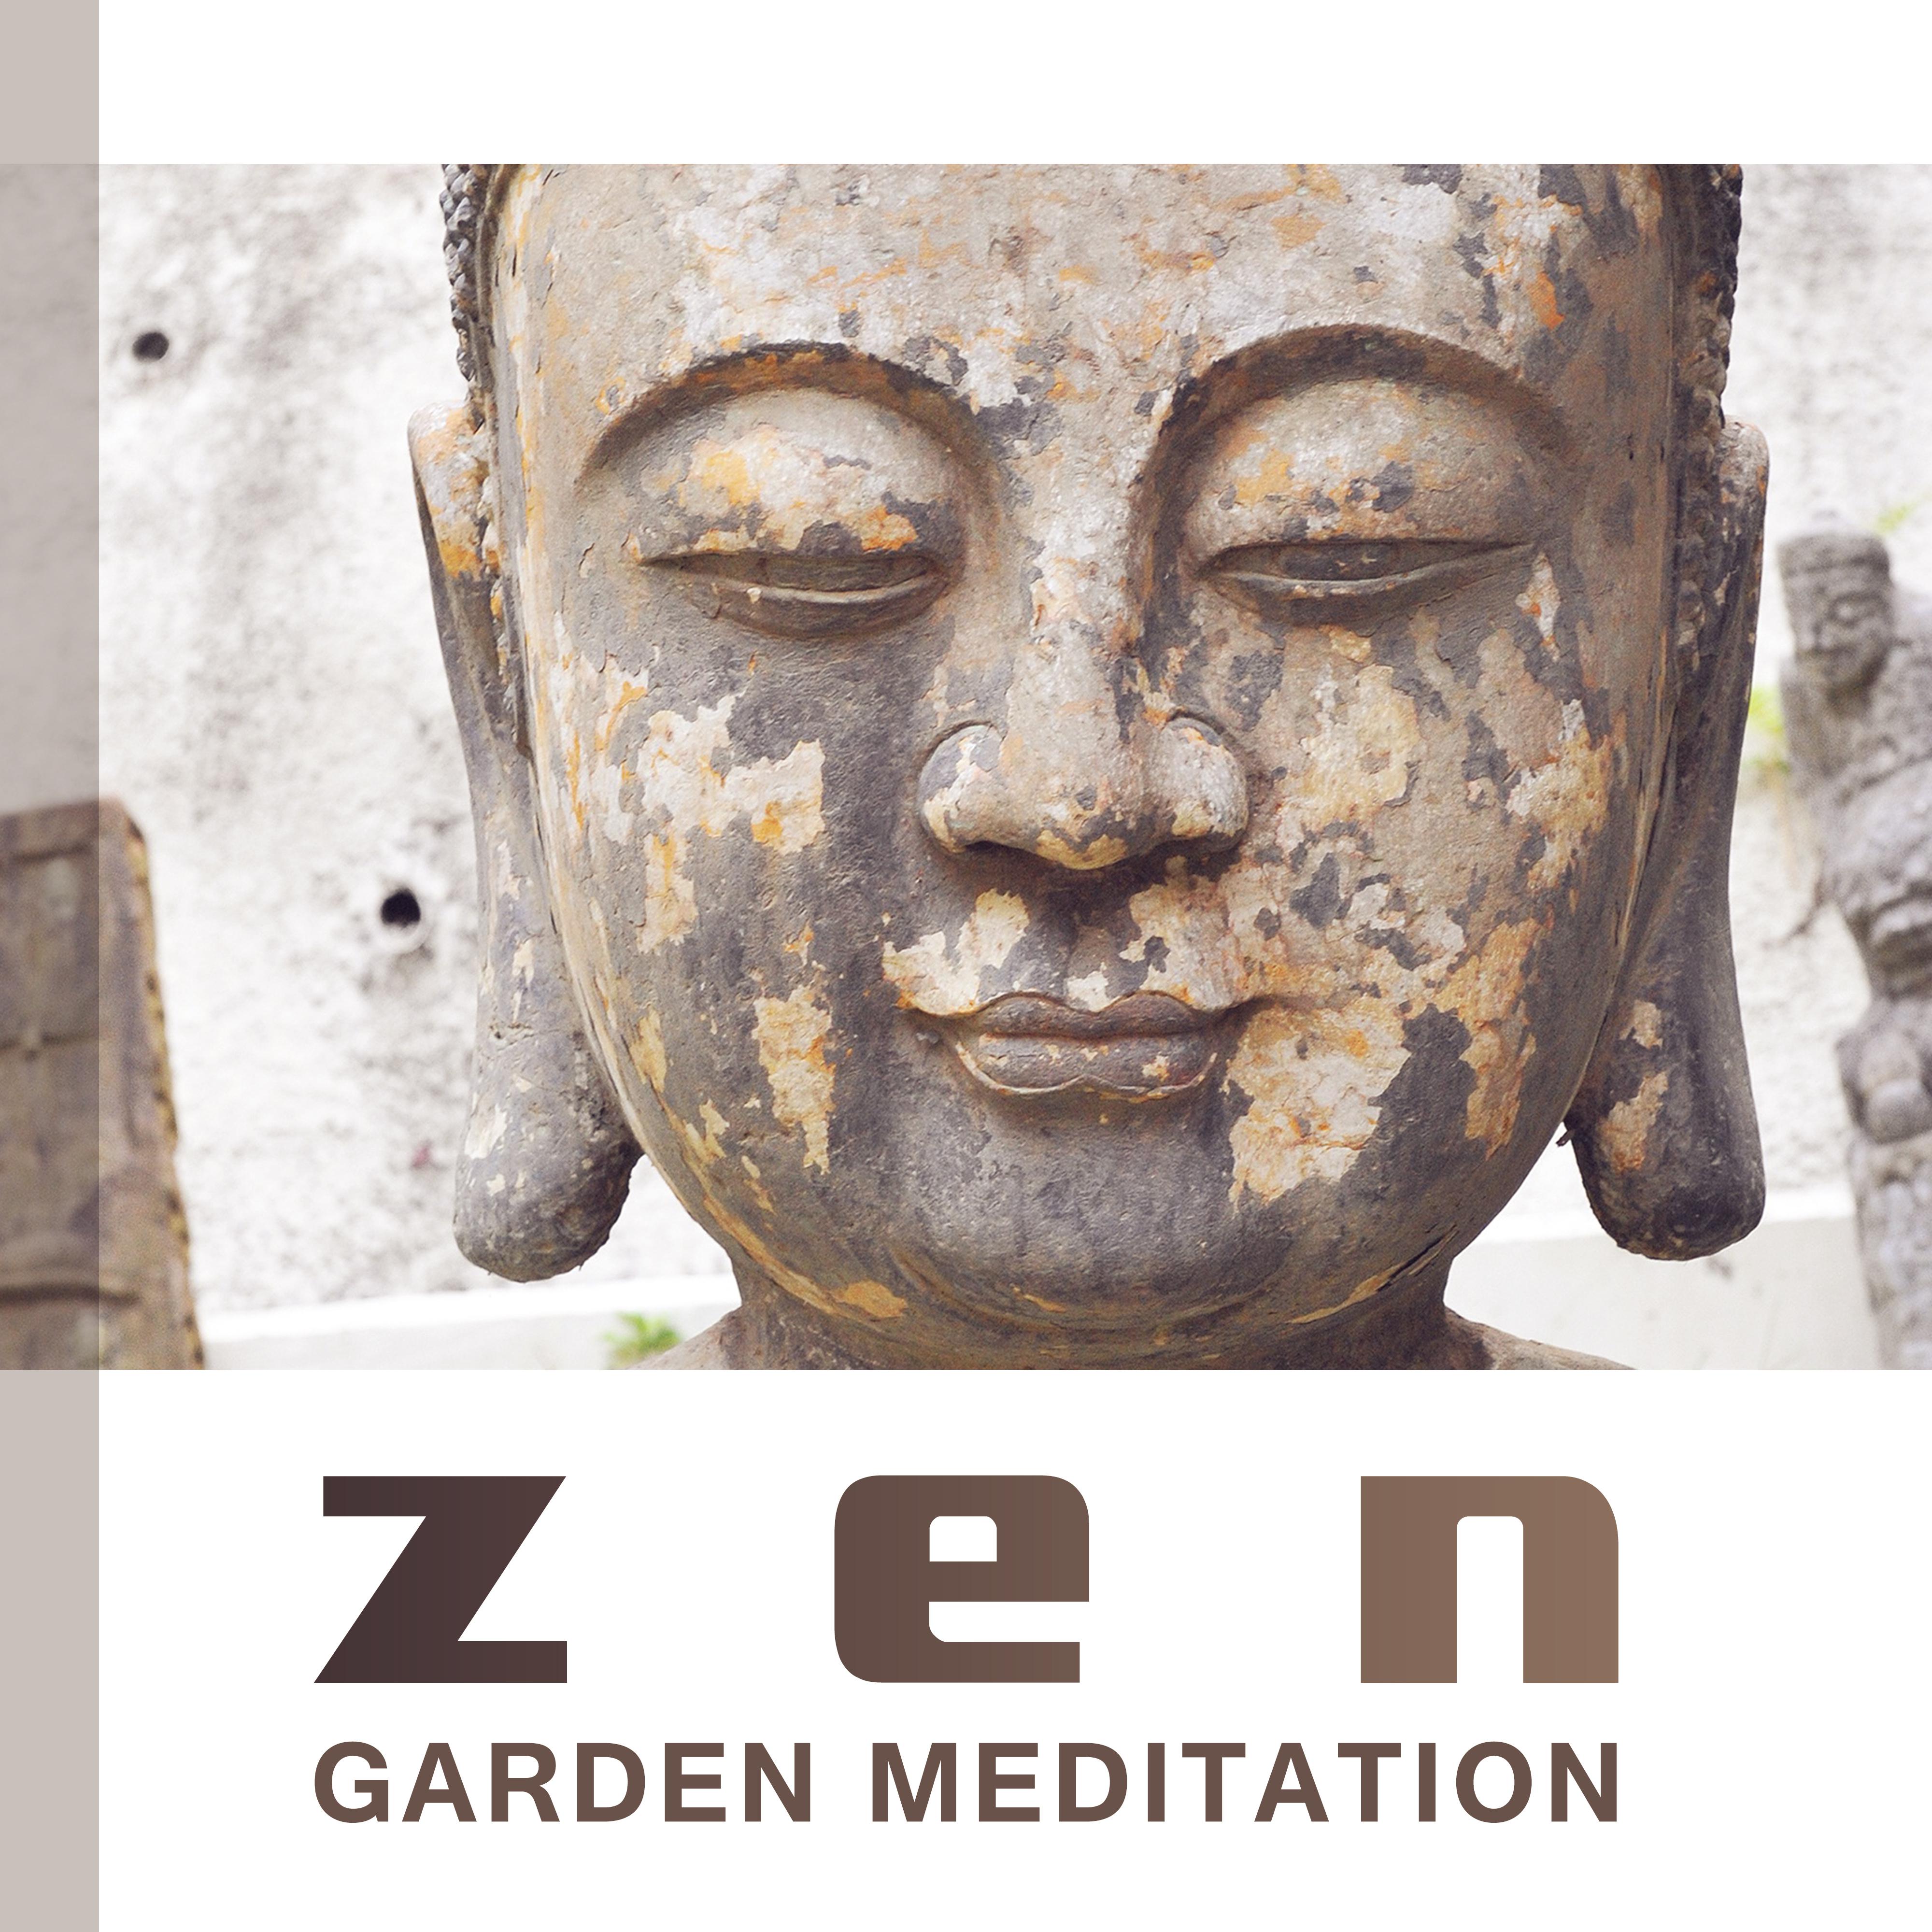 Zen Garden Meditation – New Age Meditation Music, Sounds of Nature to Calm Down, Peaceful Mind & Body, No More Stress